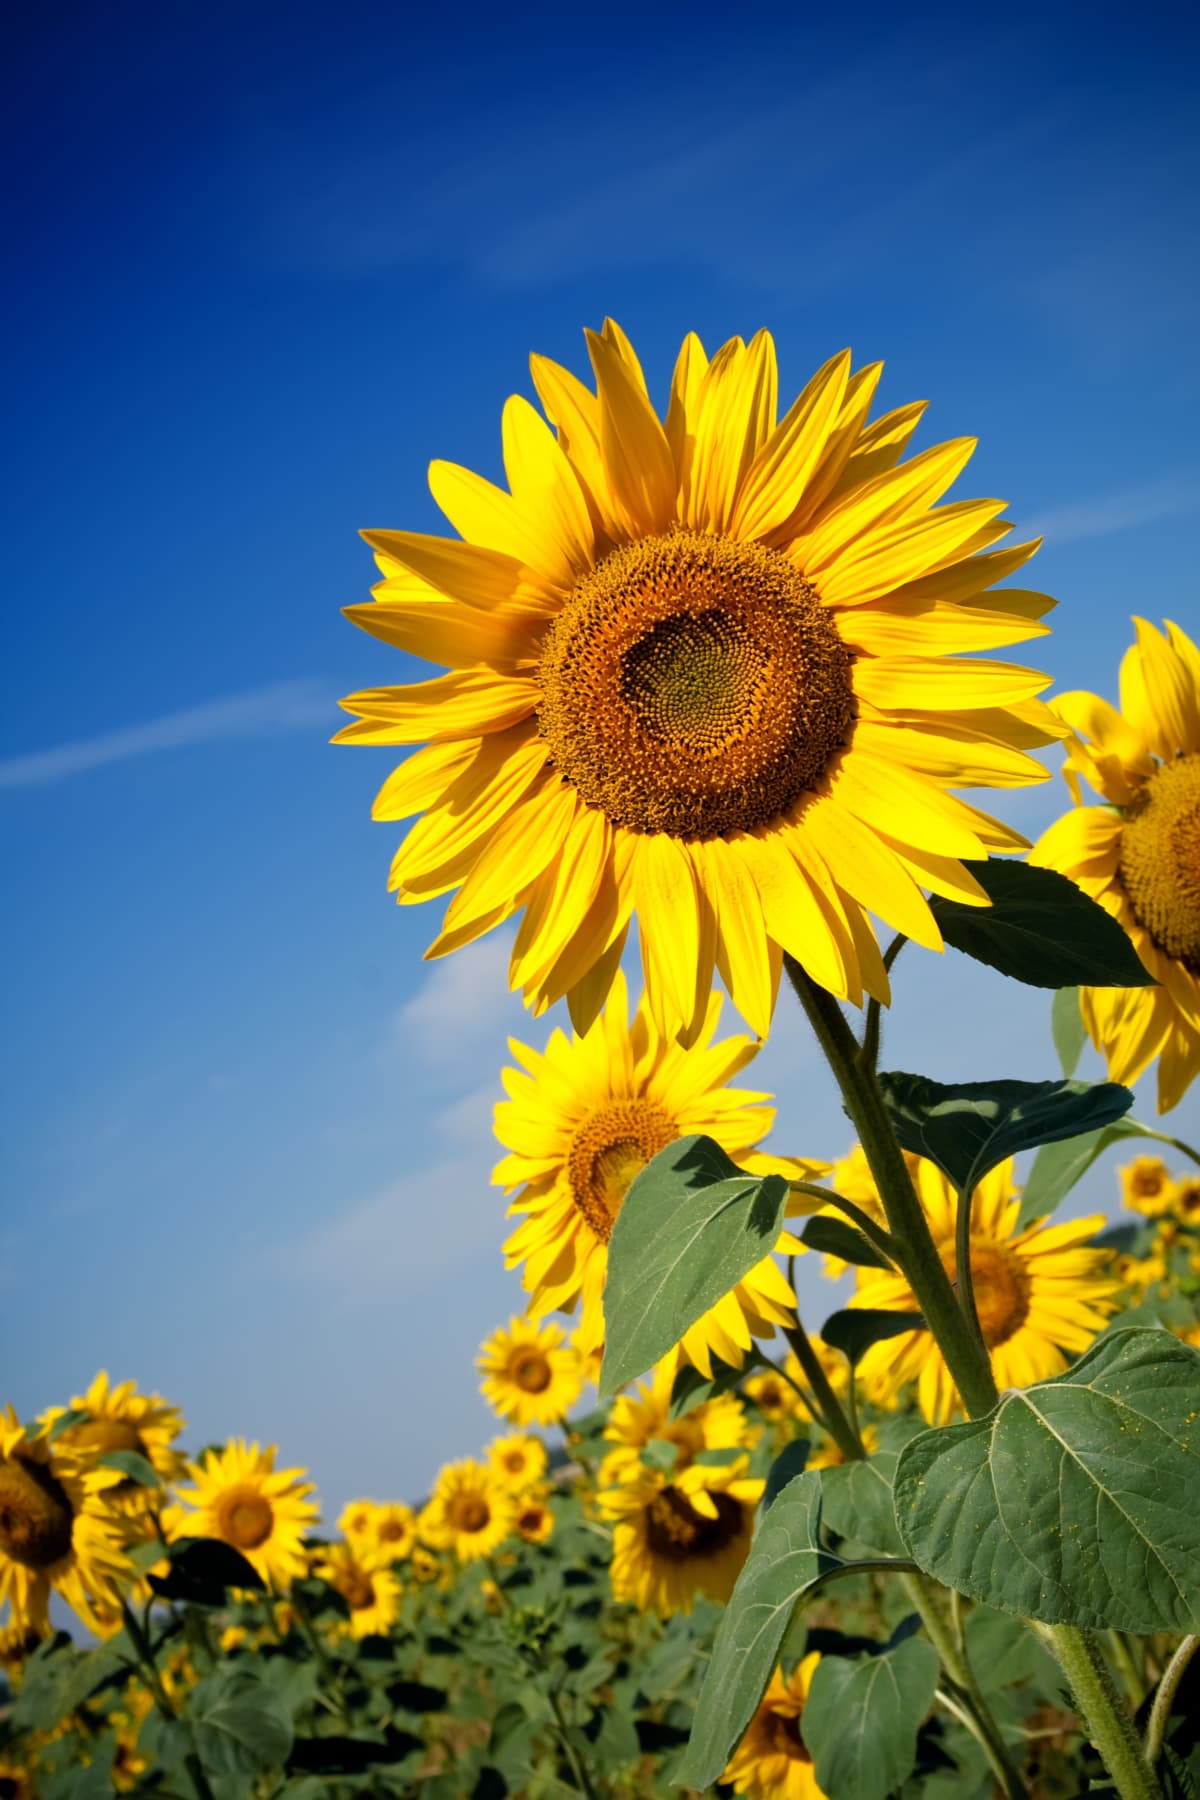 A vibrant field of sunflowers stretching out under a clear blue sky